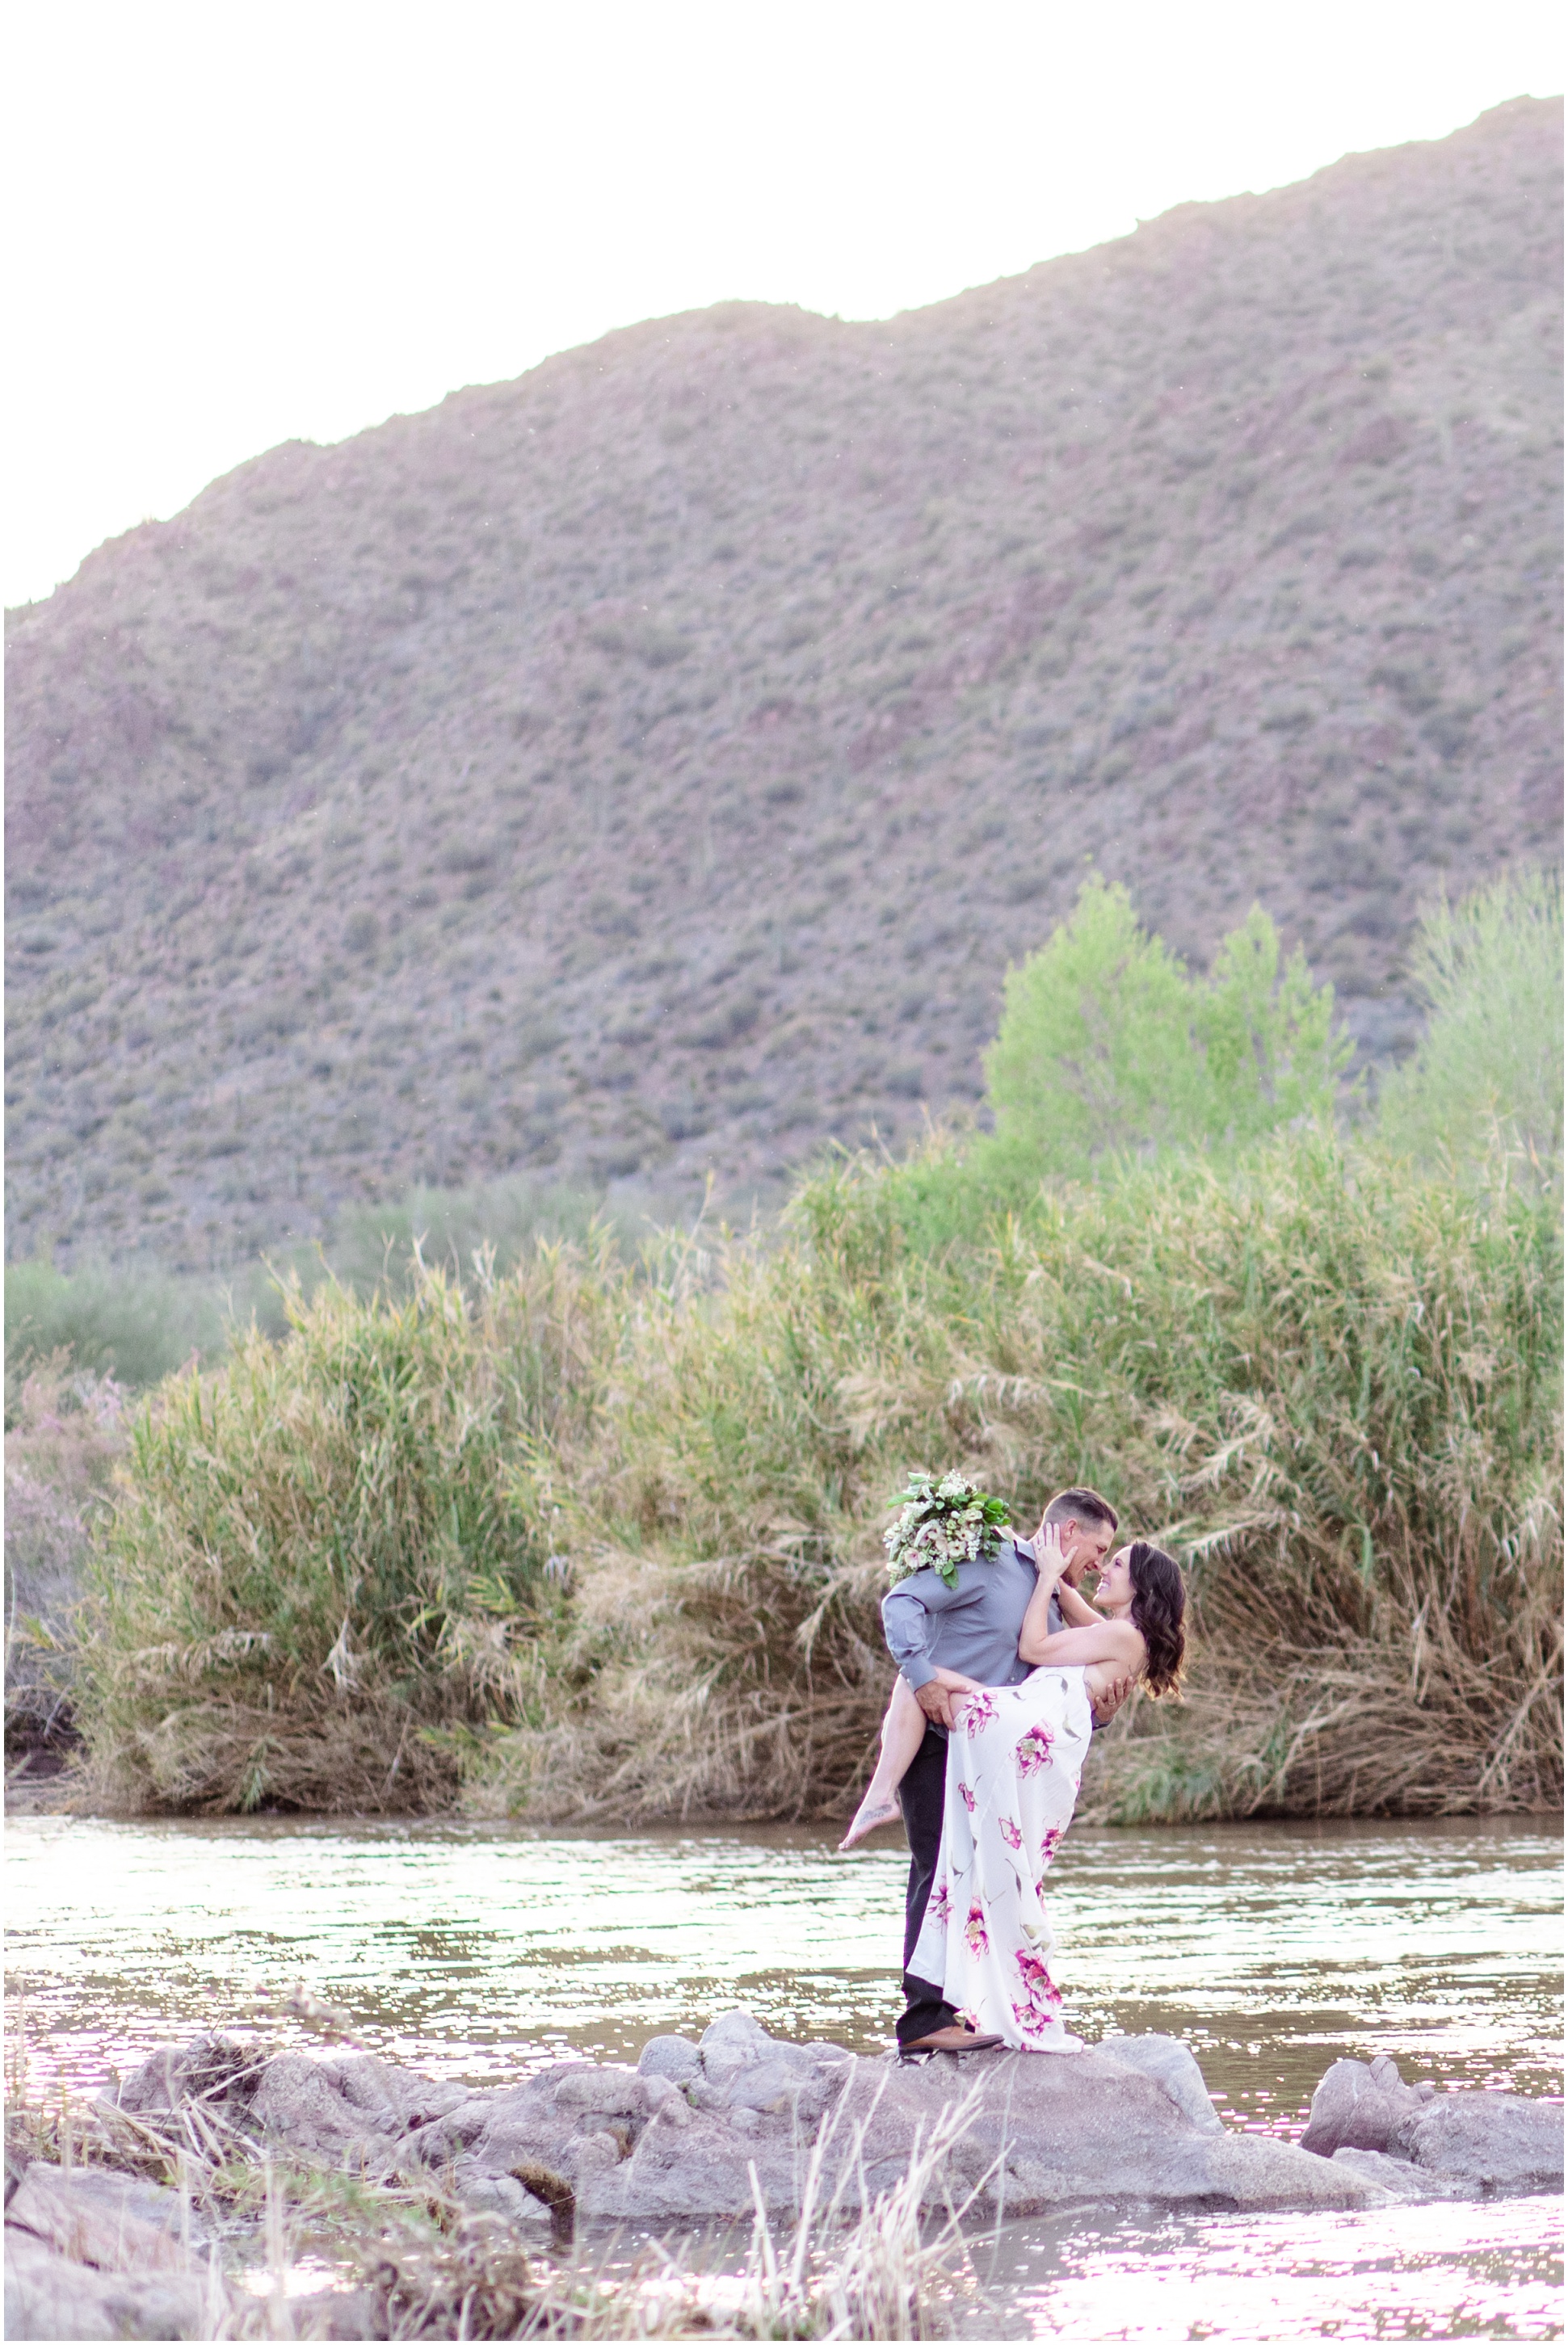 Michael dipping his bride in the salt river